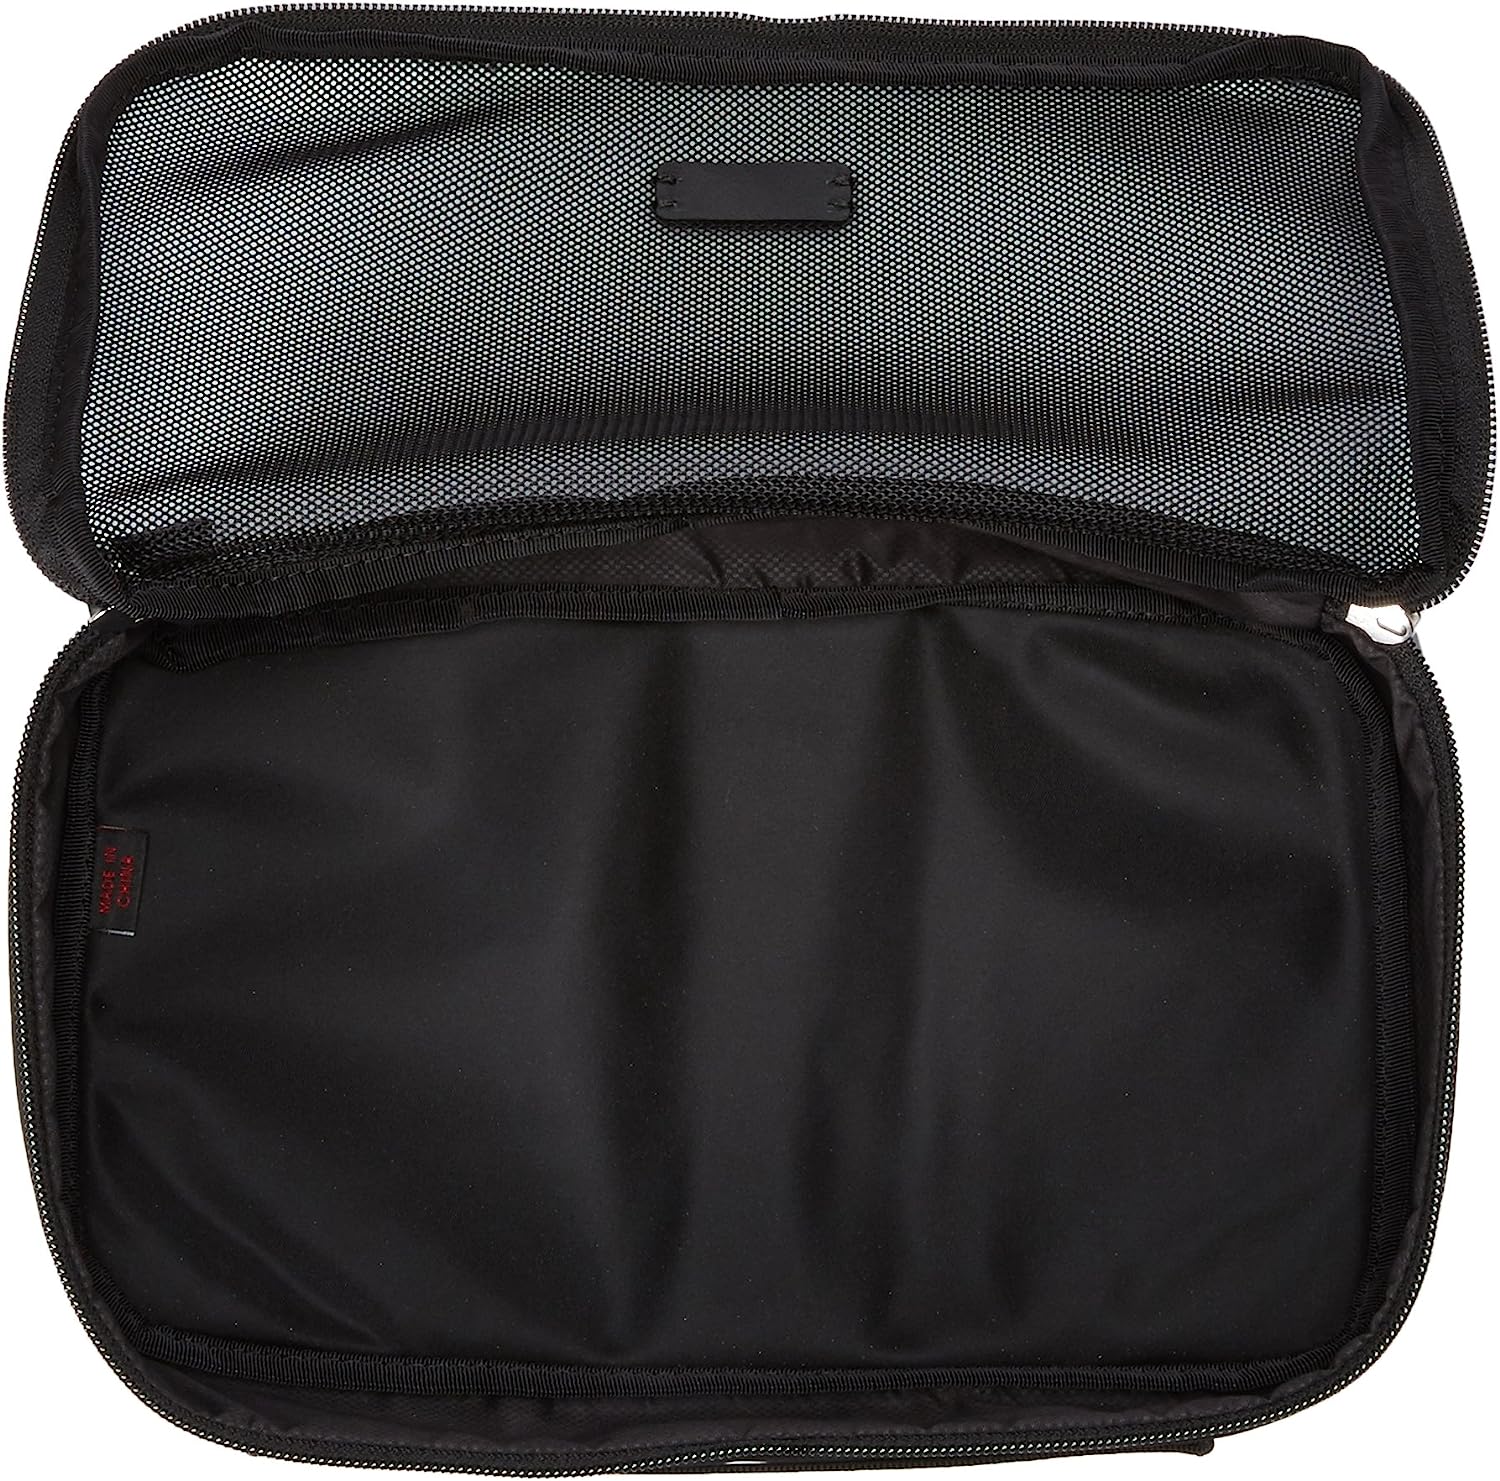 TUMI - Travel Accessories Small Packing Cube - Luggage Packable Organizer Cubes - Black Packing Cube Black - image 5 of 5